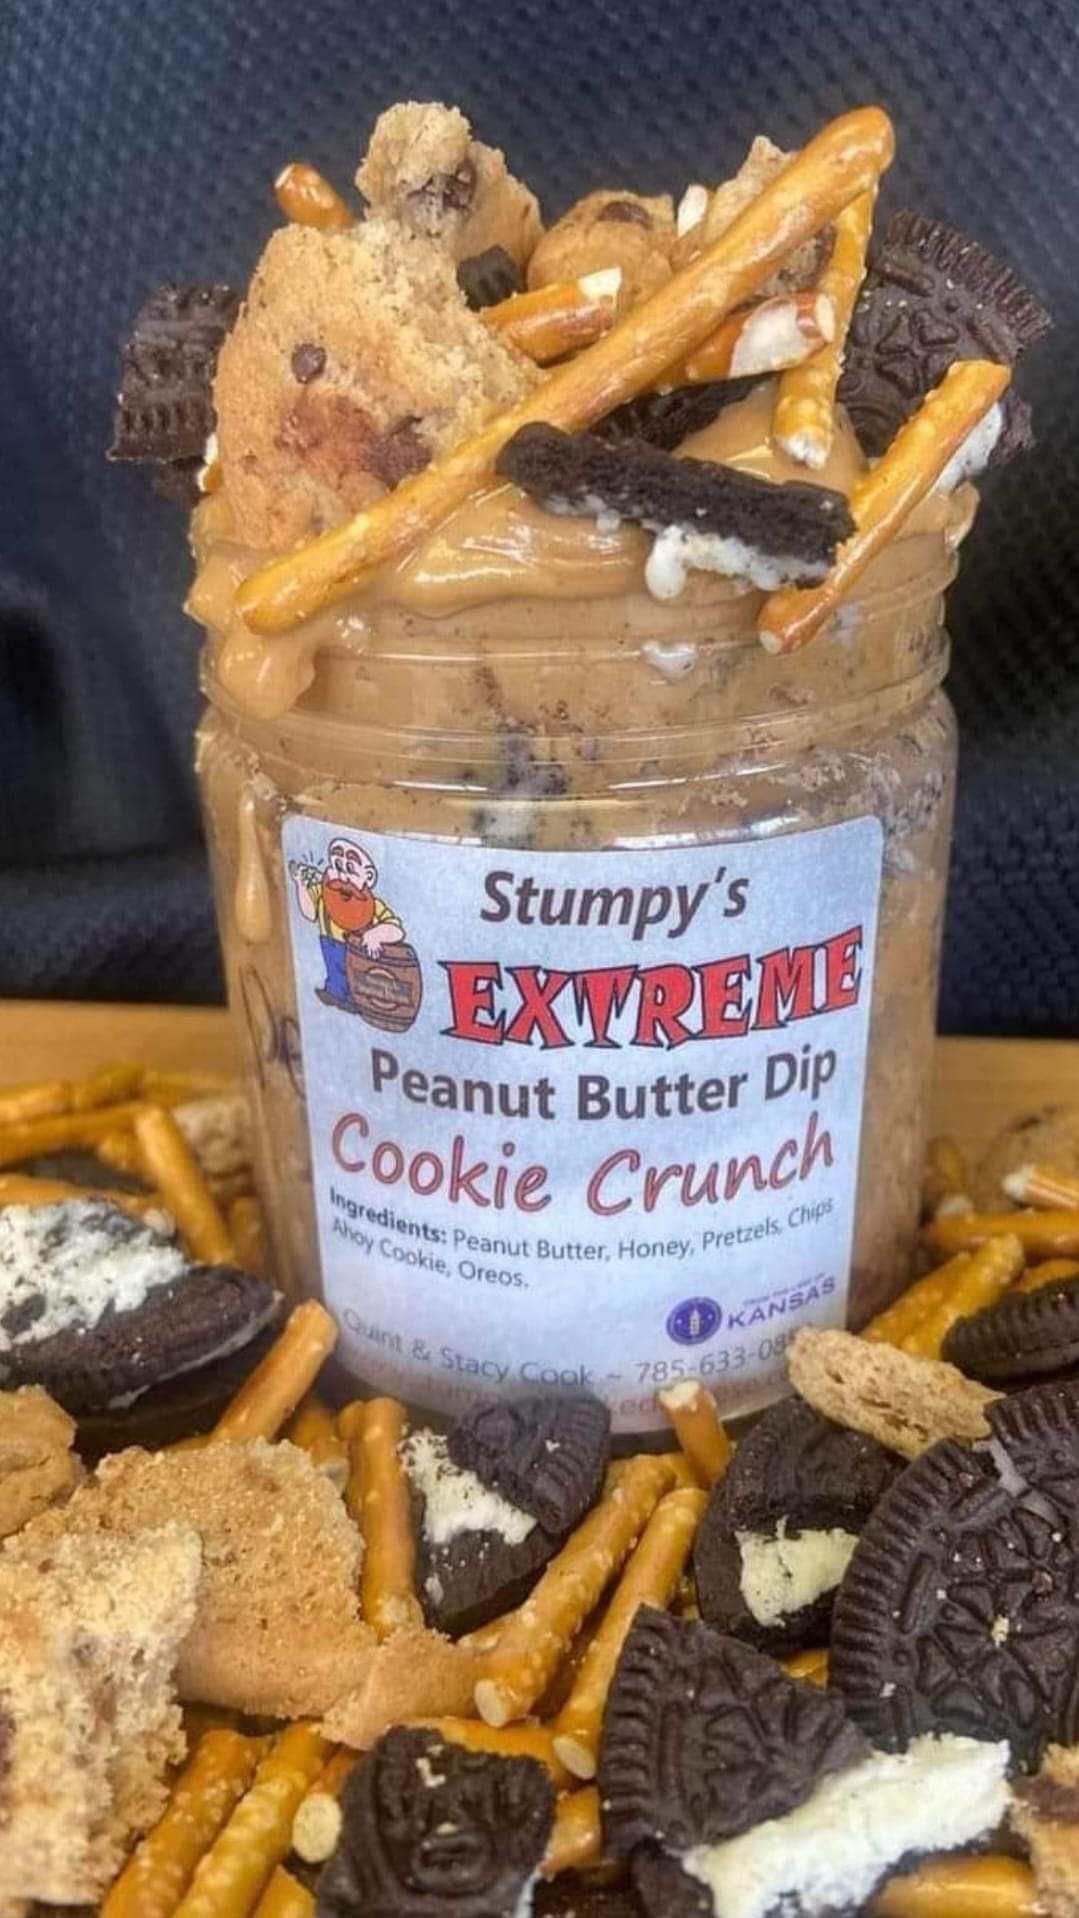 Product Image of Cookie Crunch Extreme Peanut Butter Dip (8oz)